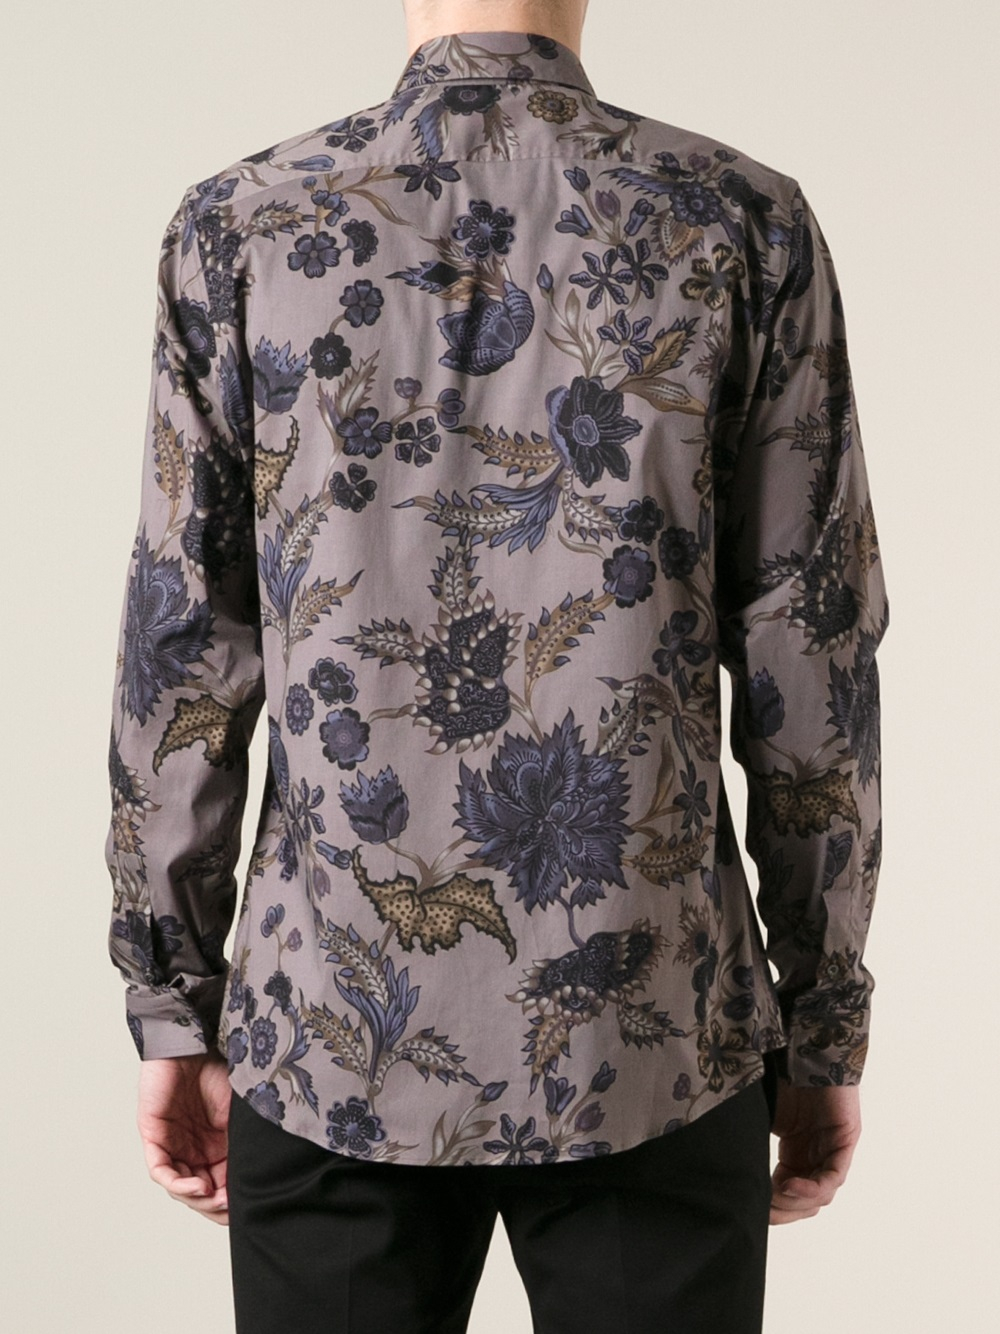 Gucci Floral Print Shirt in Grey (Black) for Men - Lyst